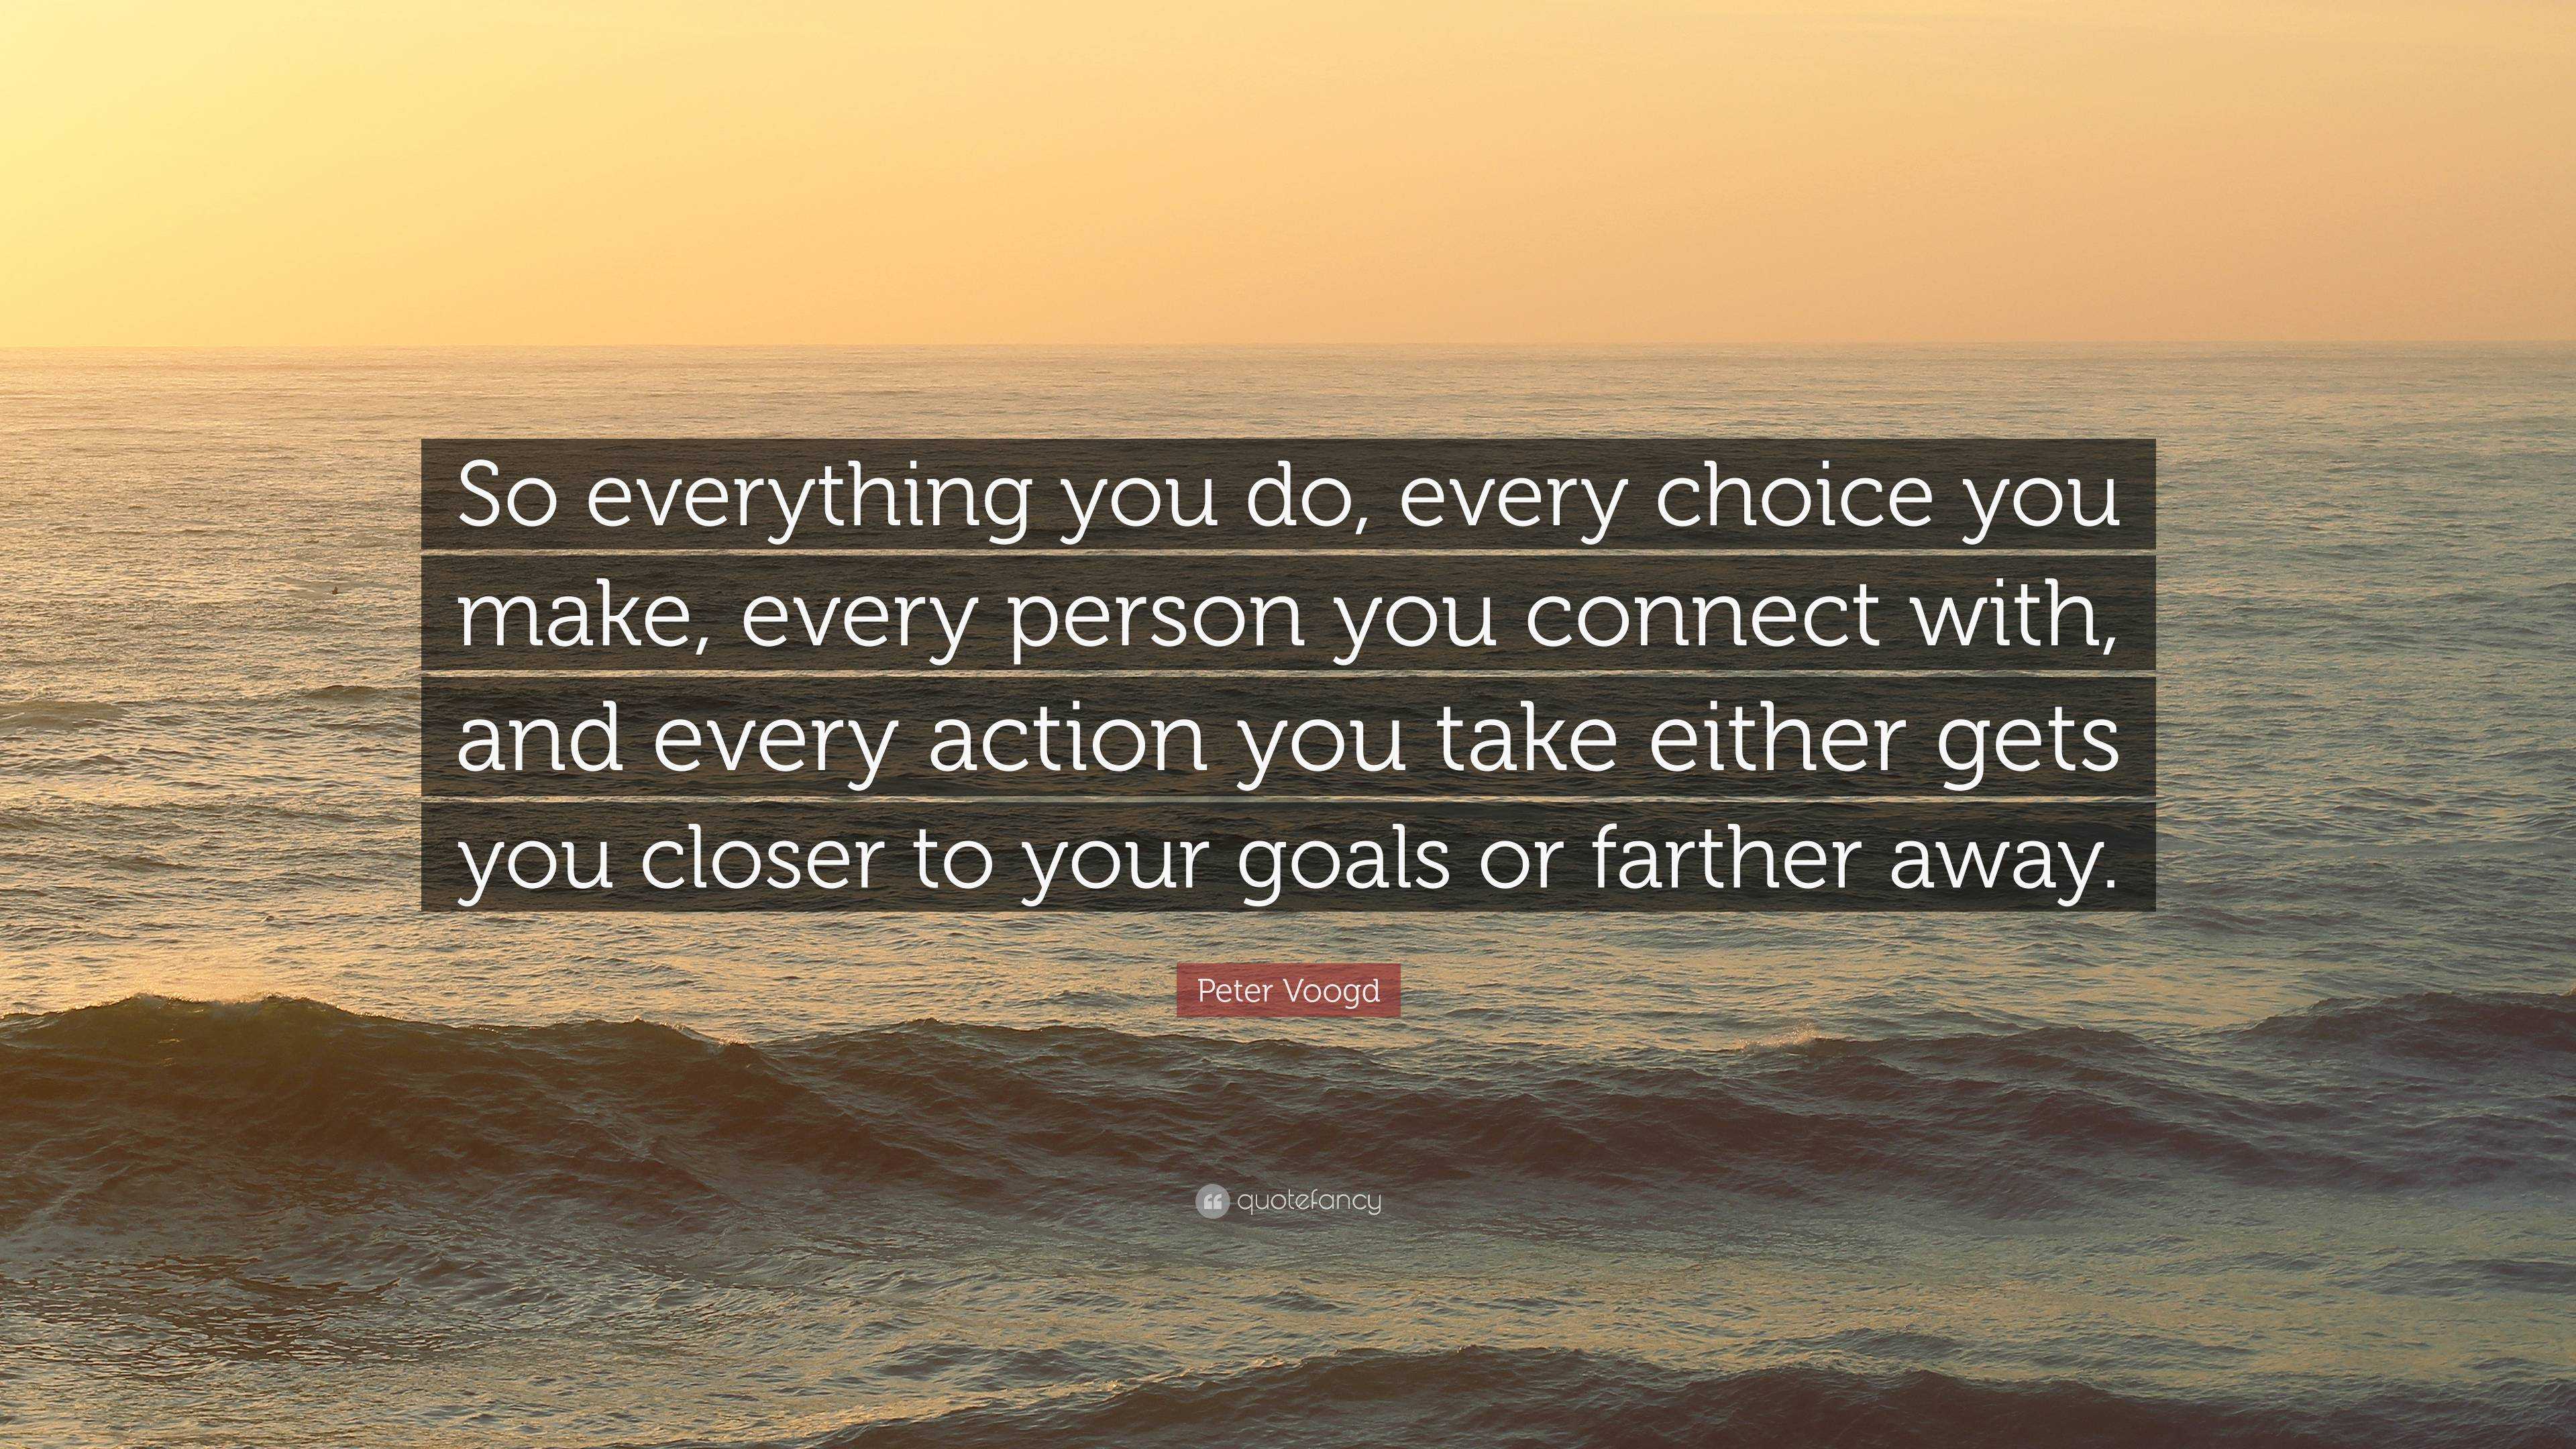 Peter Voogd Quote: “So everything you do, every choice you make, every  person you connect with, and every action you take either gets you cl”